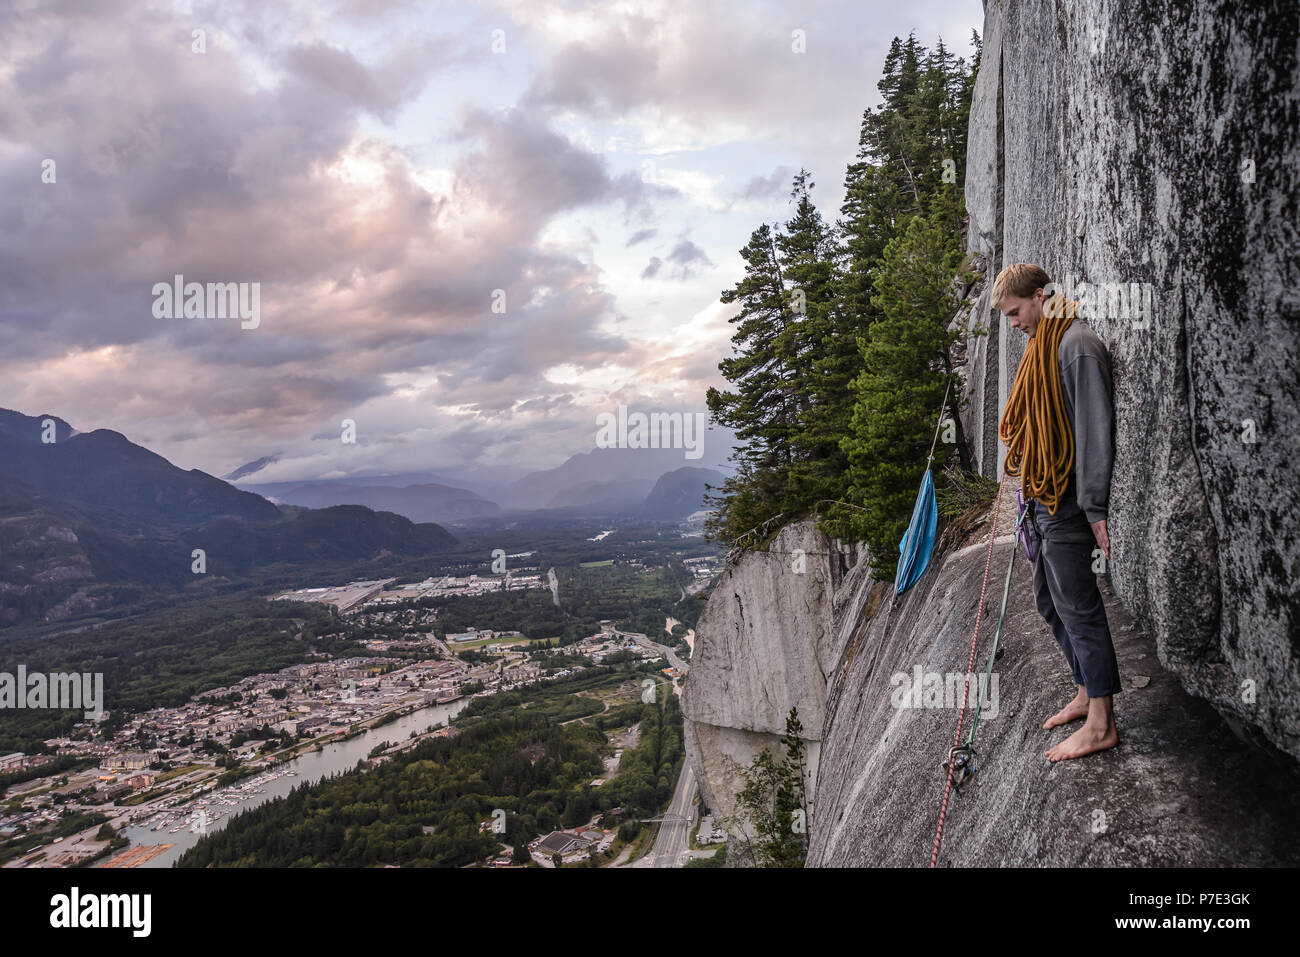 Young male climber standing barefoot on bellygood ledge, The Chief, Squamish, Canada Stock Photo